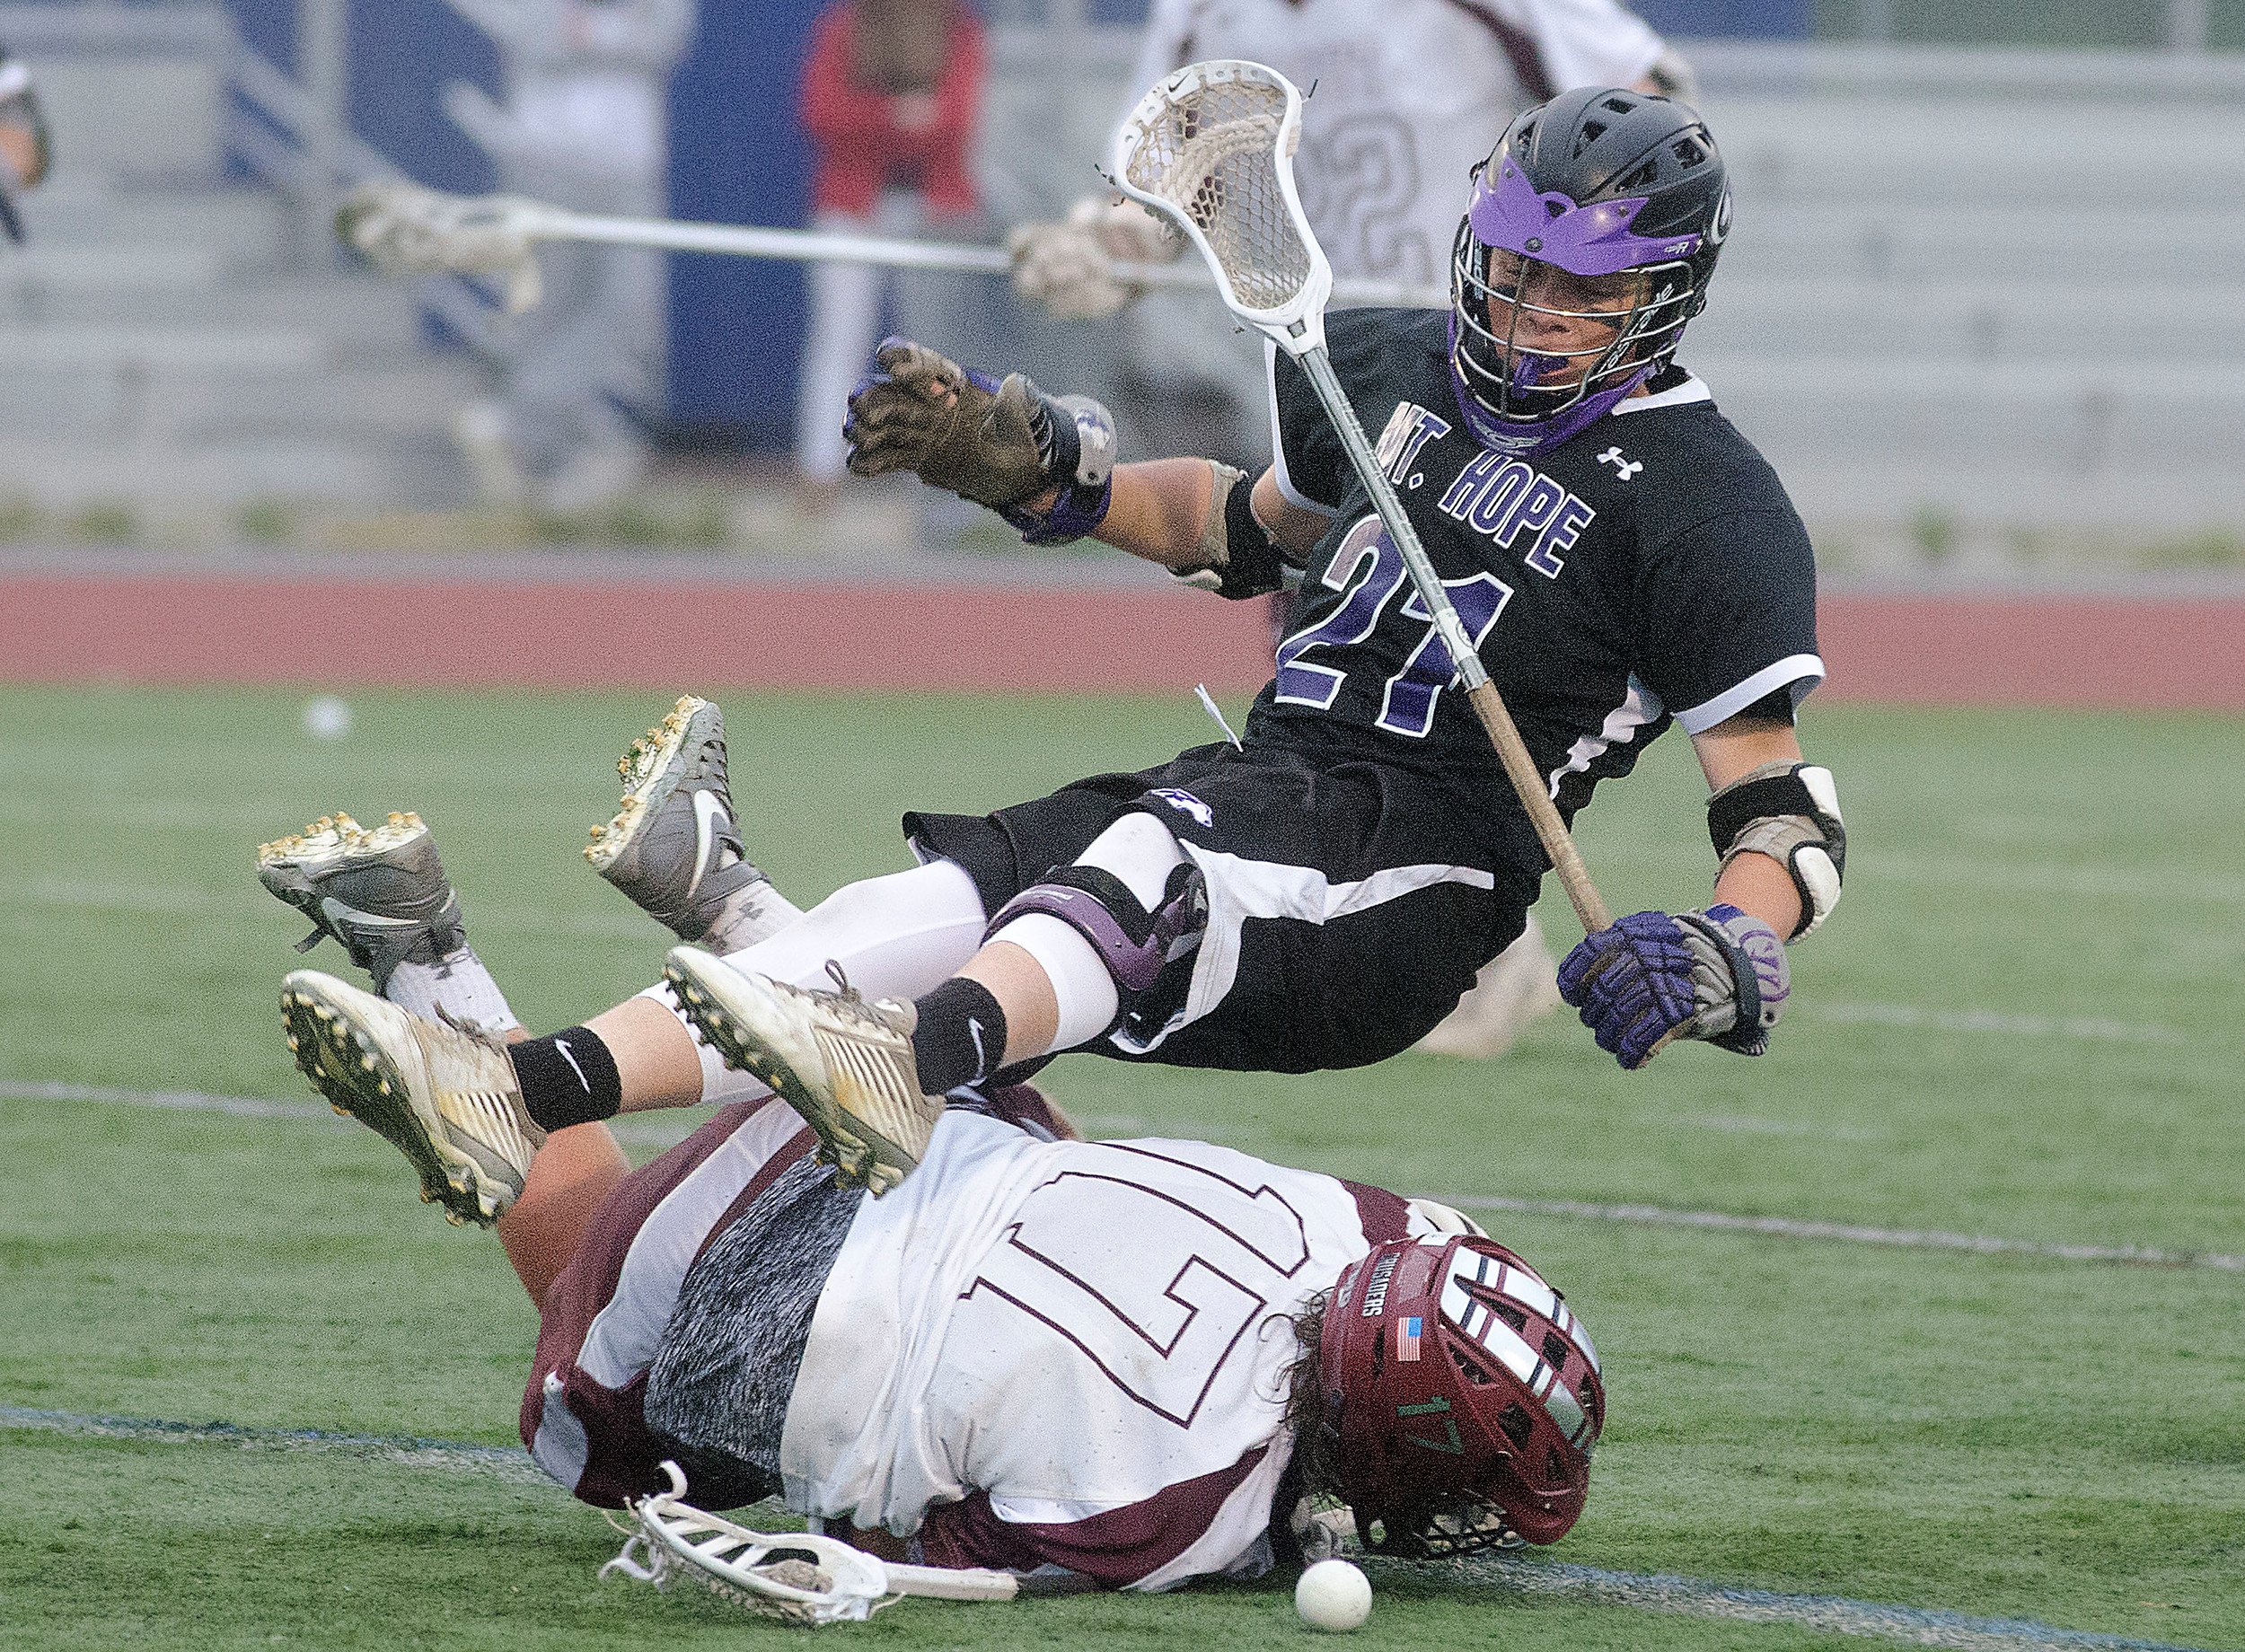 Huskies attacker Stephen Serbst takes a low hit from Prout's Christian Fonseca while playing a loose ball.